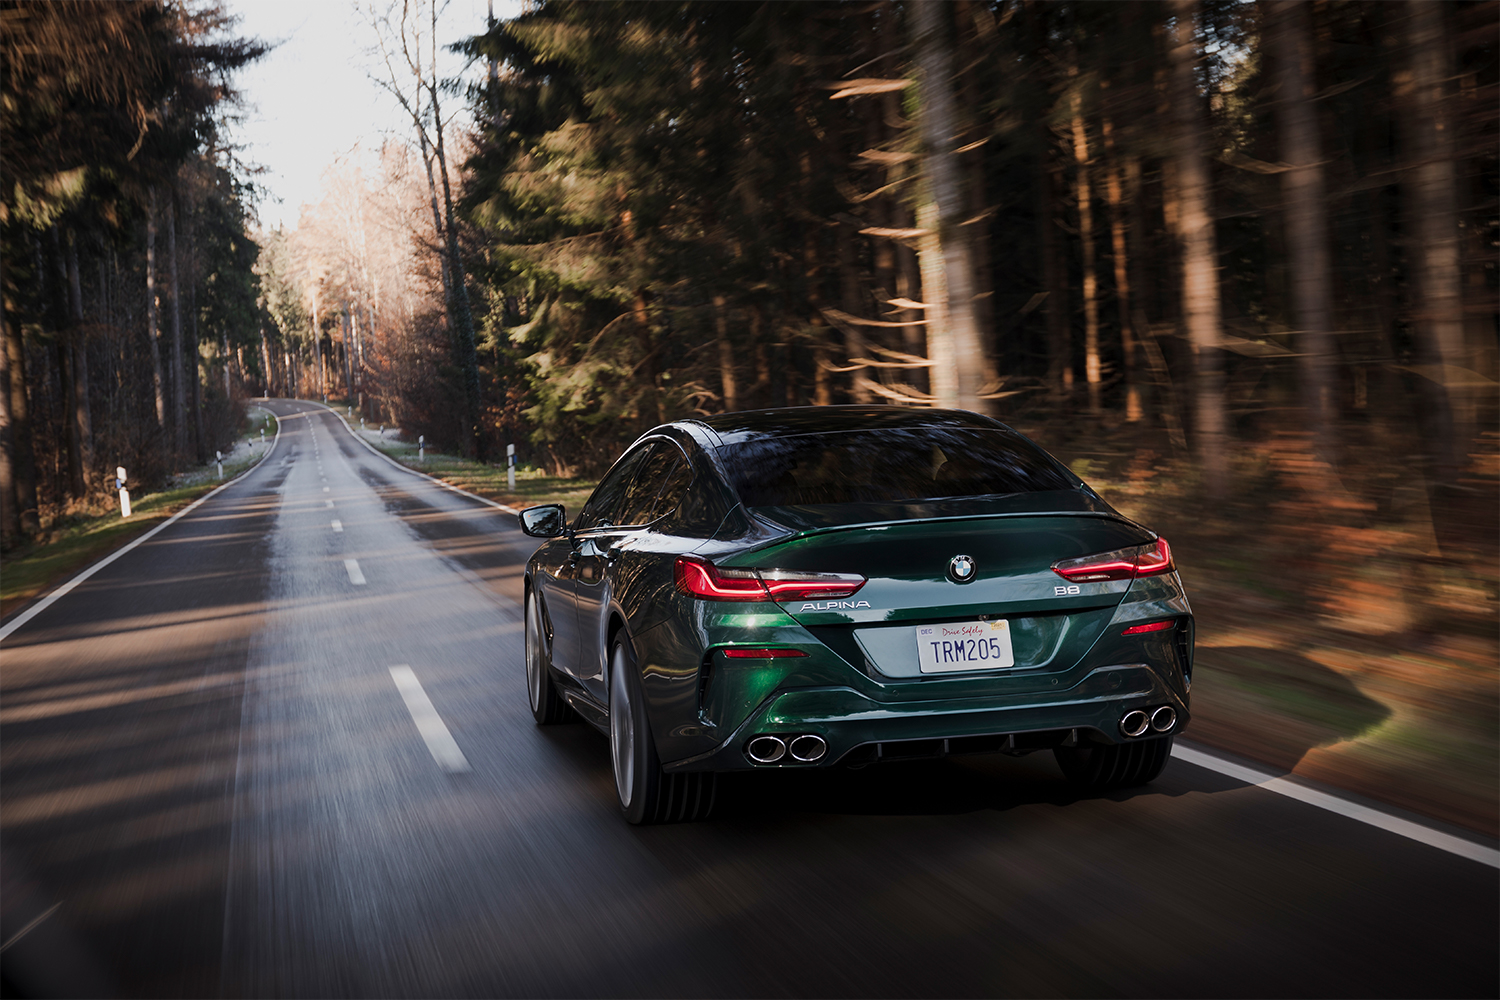 The 2022 BMW Alpina B8 Gran Coupe in green shown from the rear while it drives down a road between lines of trees. In our review of the luxury car, we found it excels in comfort and speed.